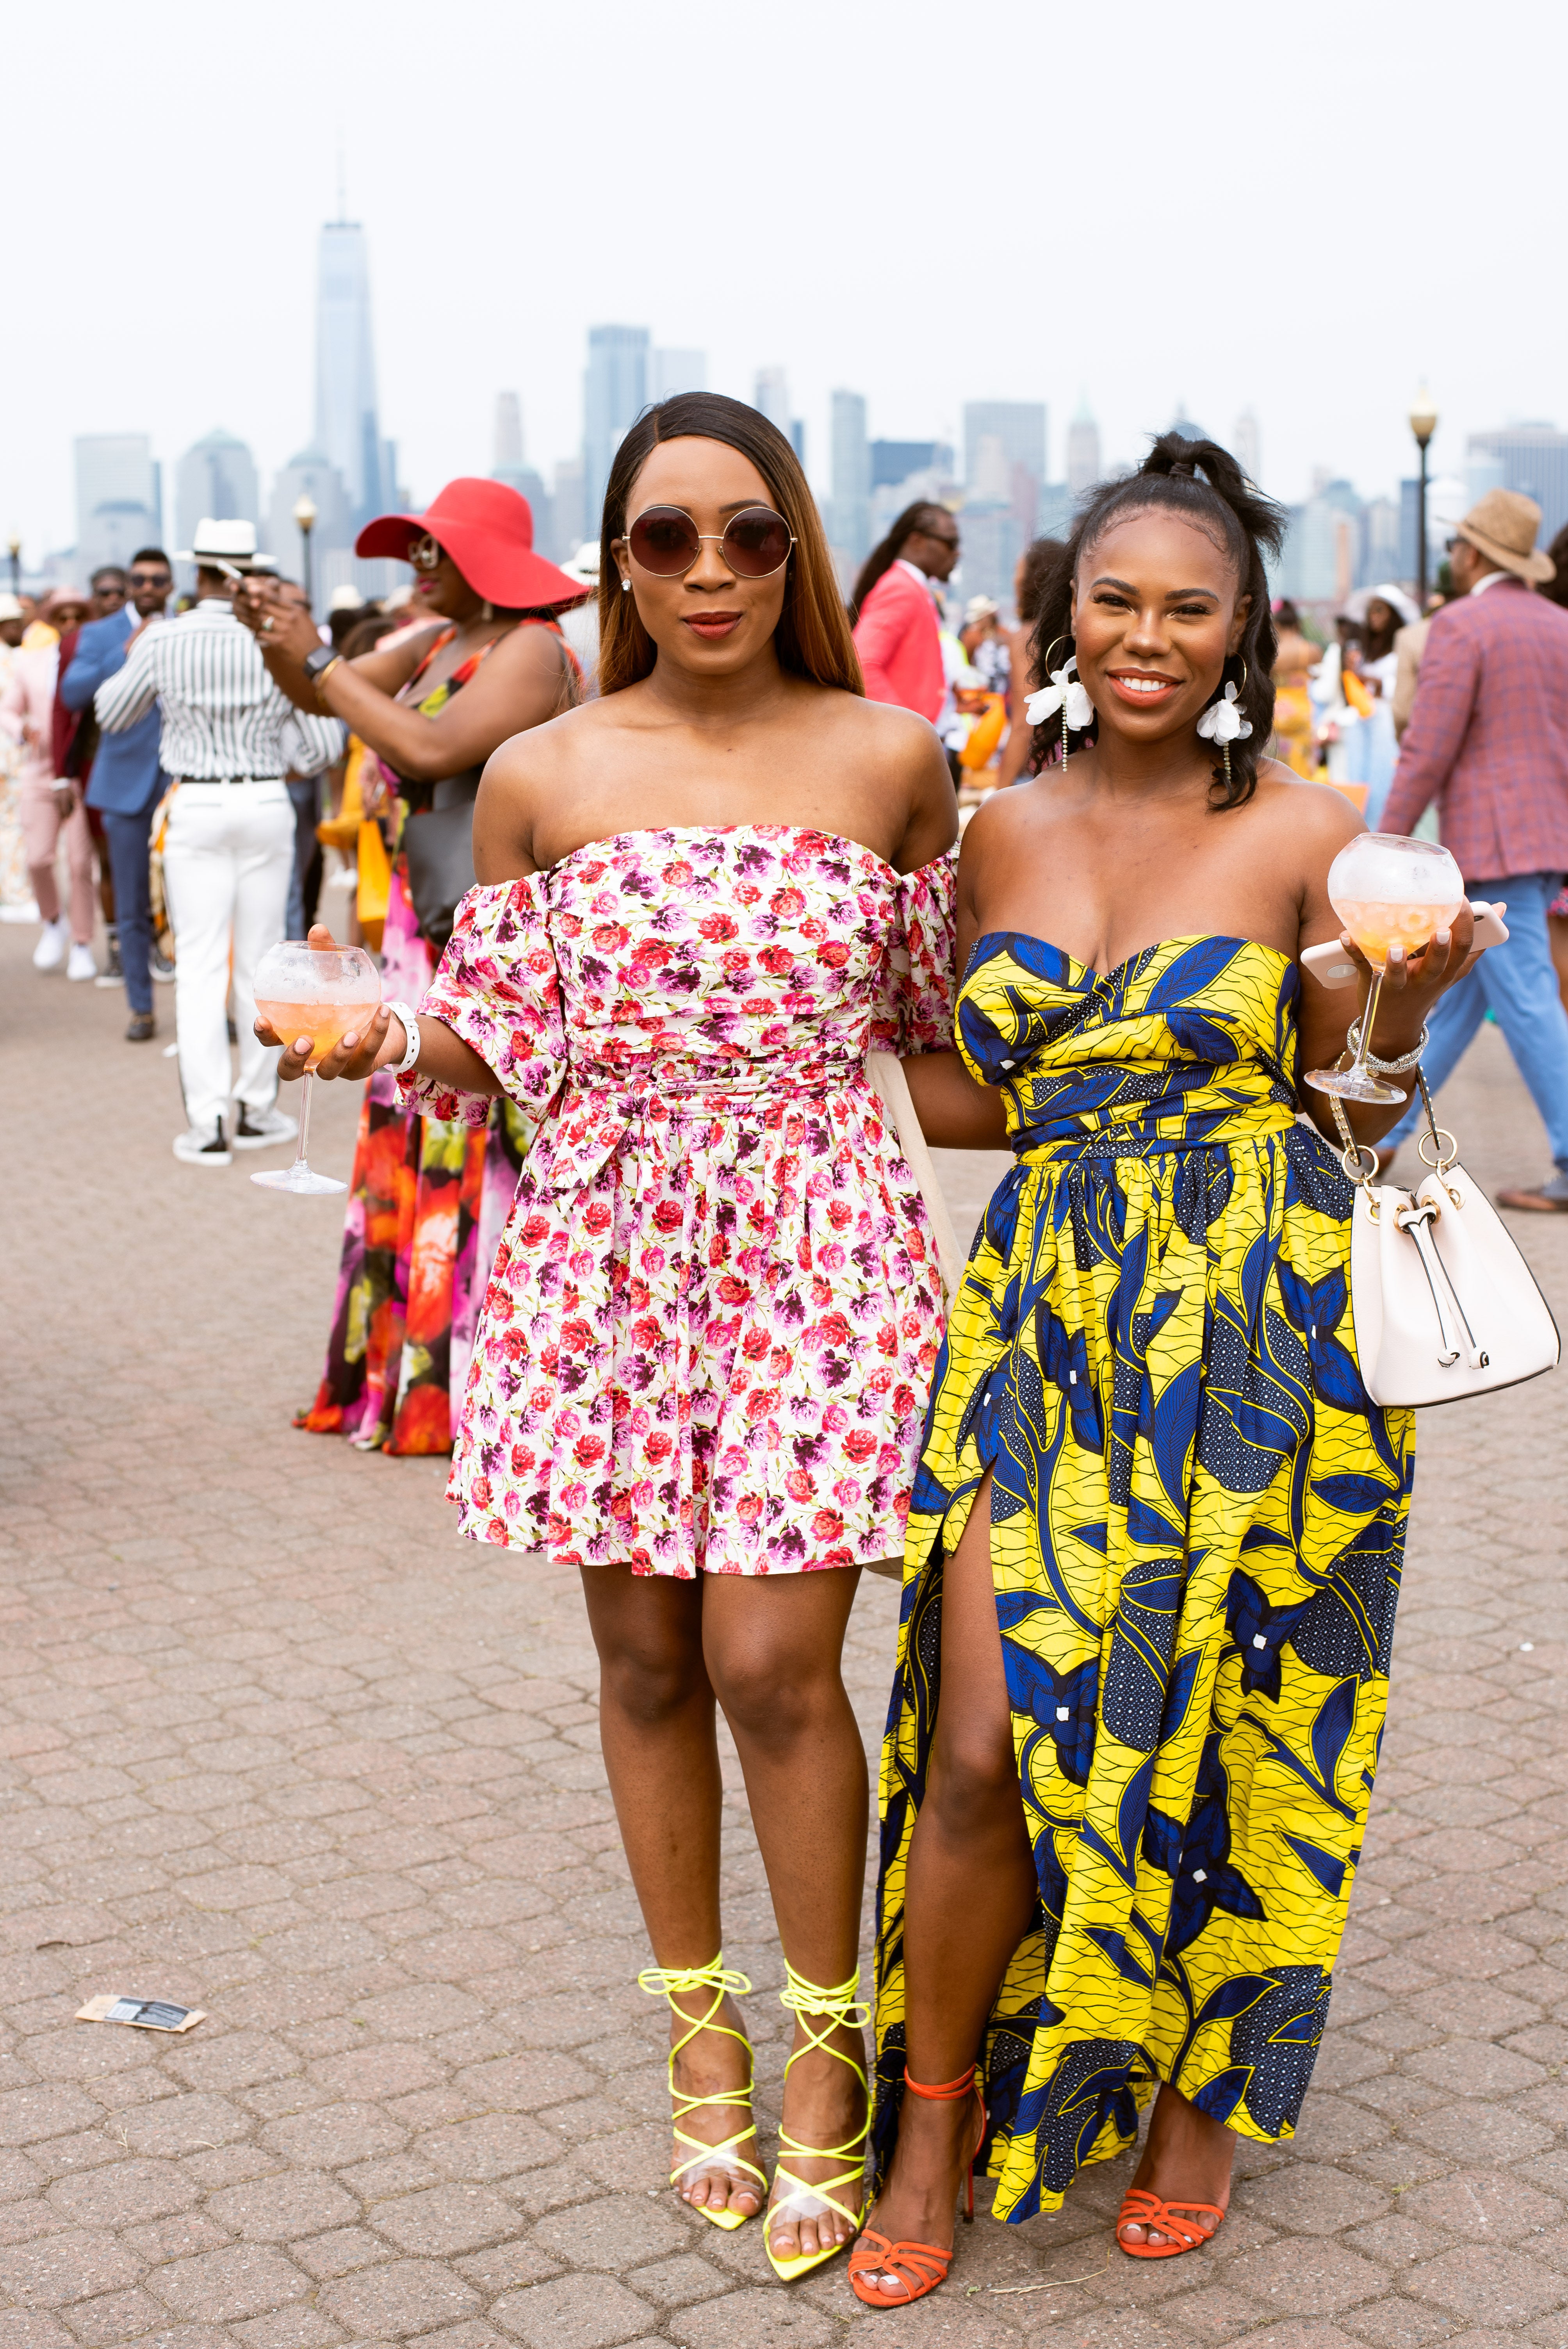 The Best Dressed at Veuve Clicquot's 12th Annual Polo Classic